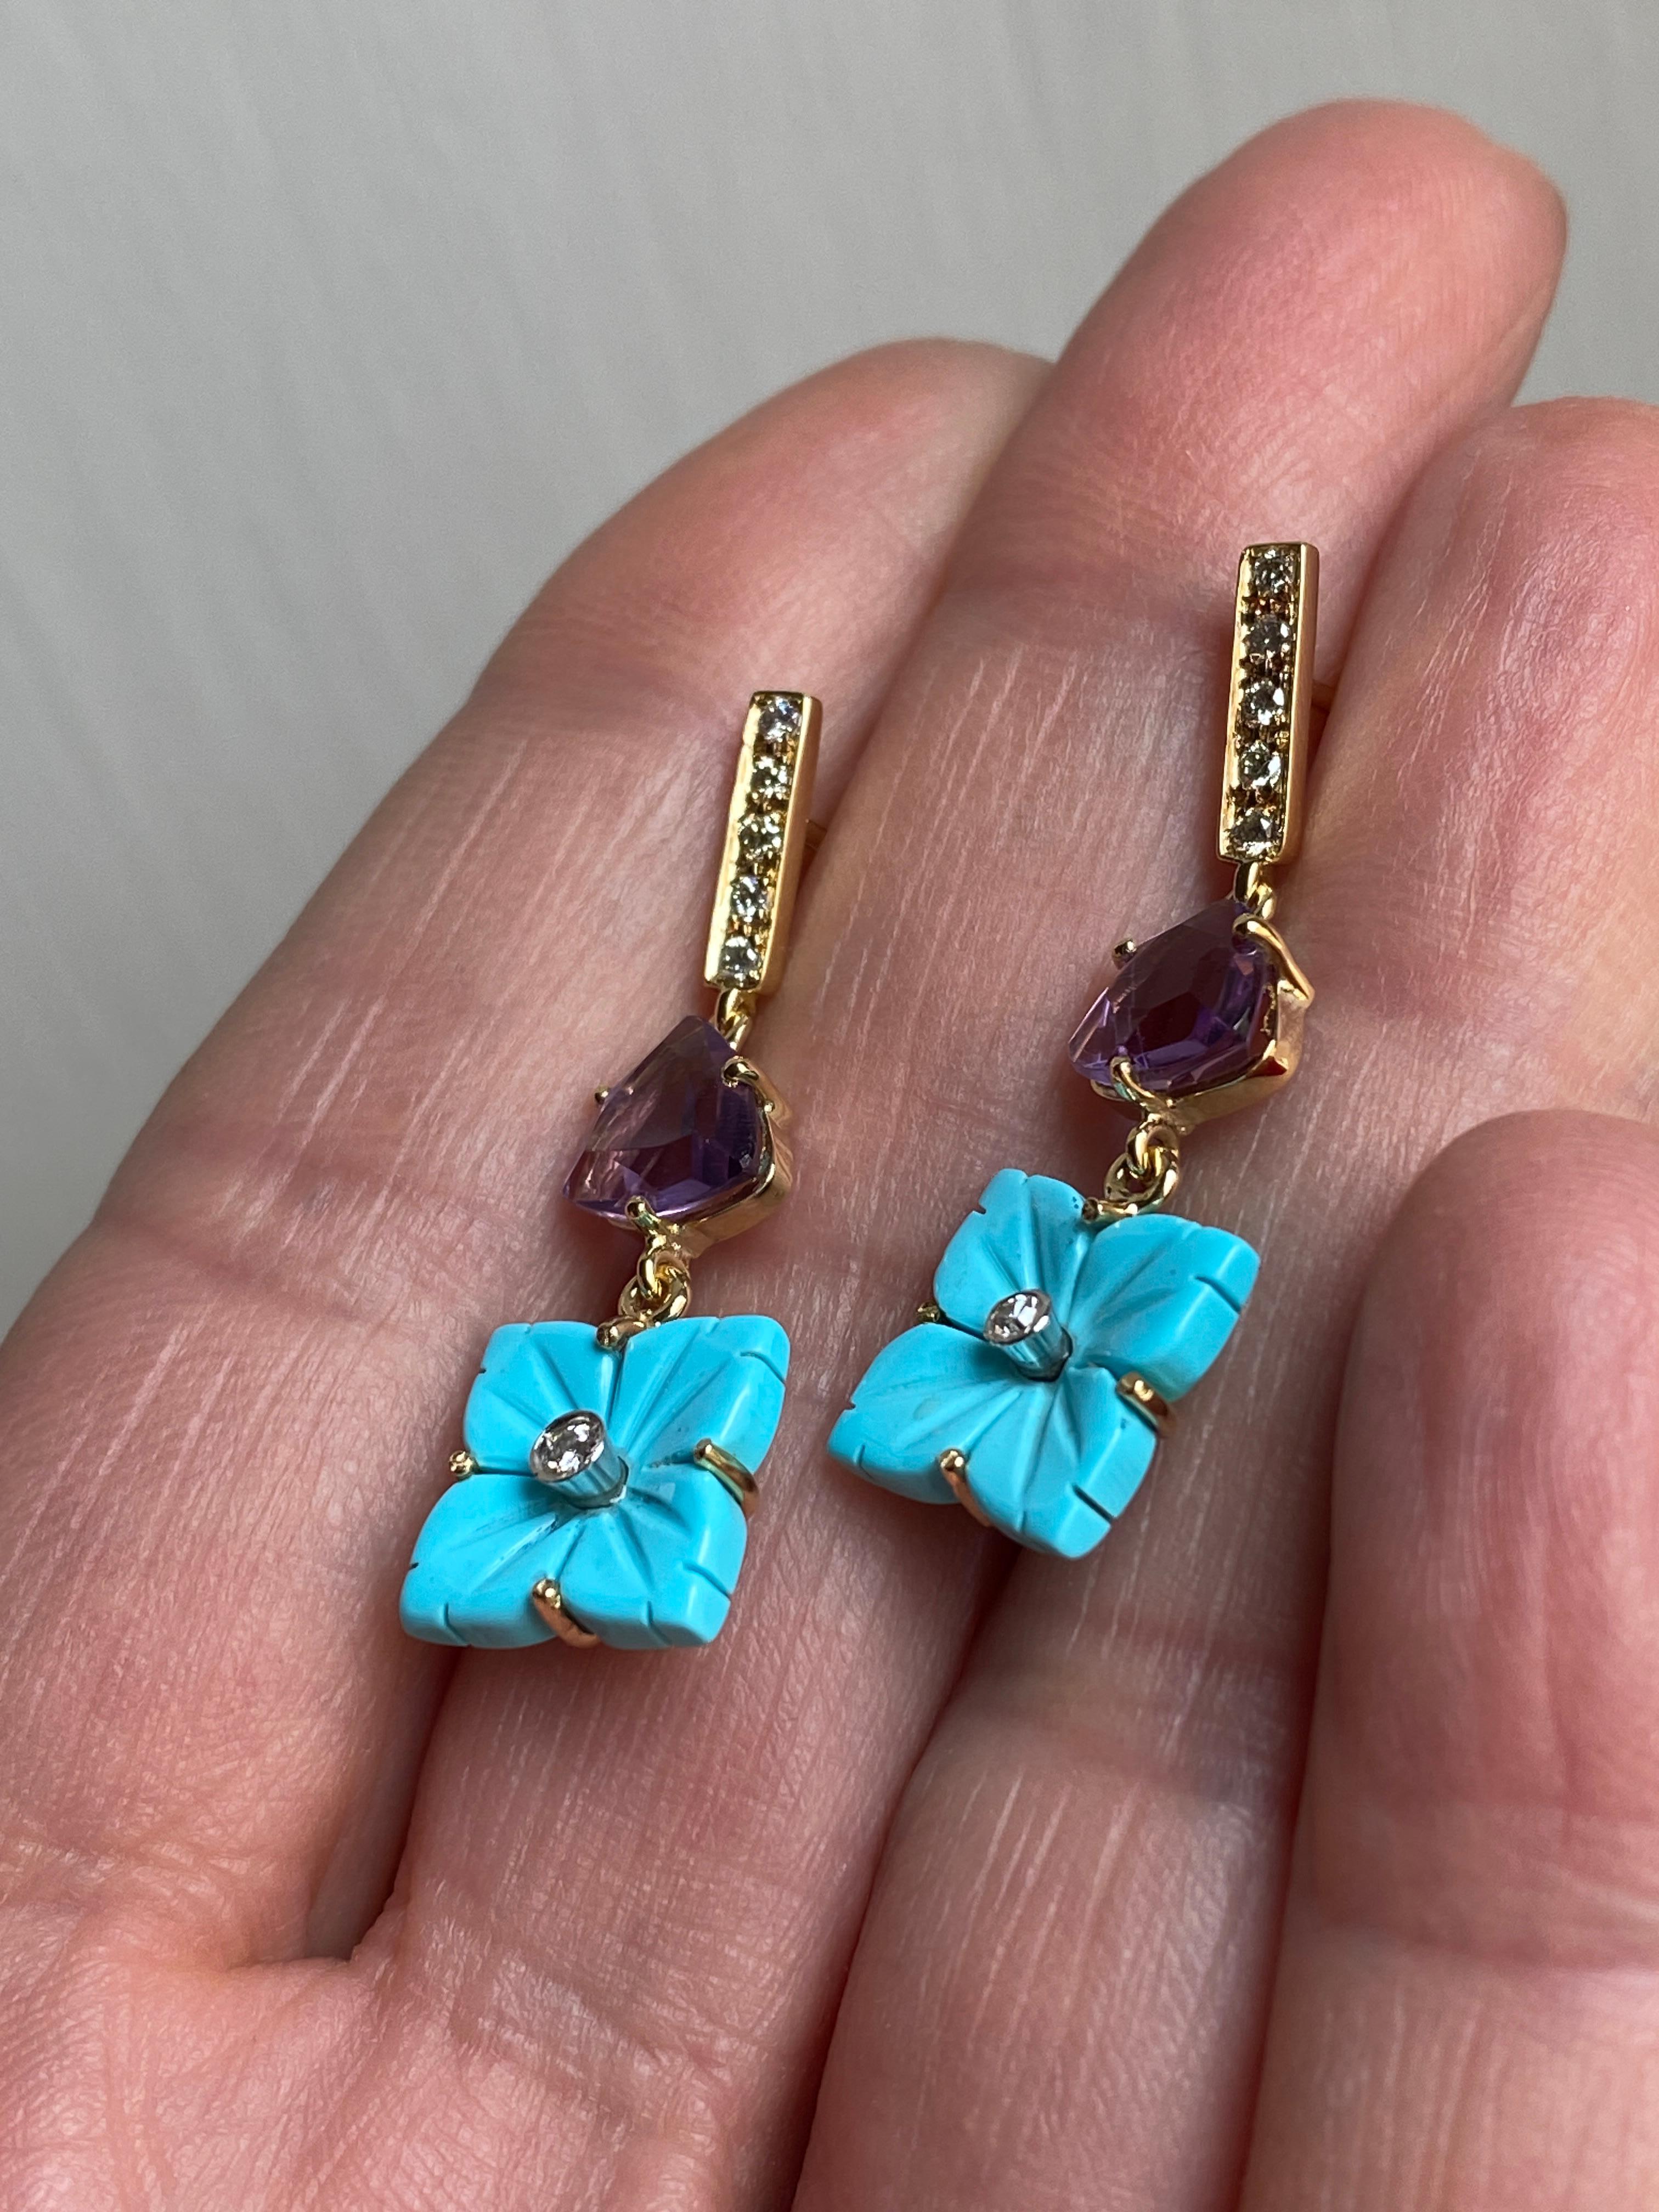 Art Deco Rossella Ugolini 18K Gold Amethyst and Turquoise Floral Earrings For Sale